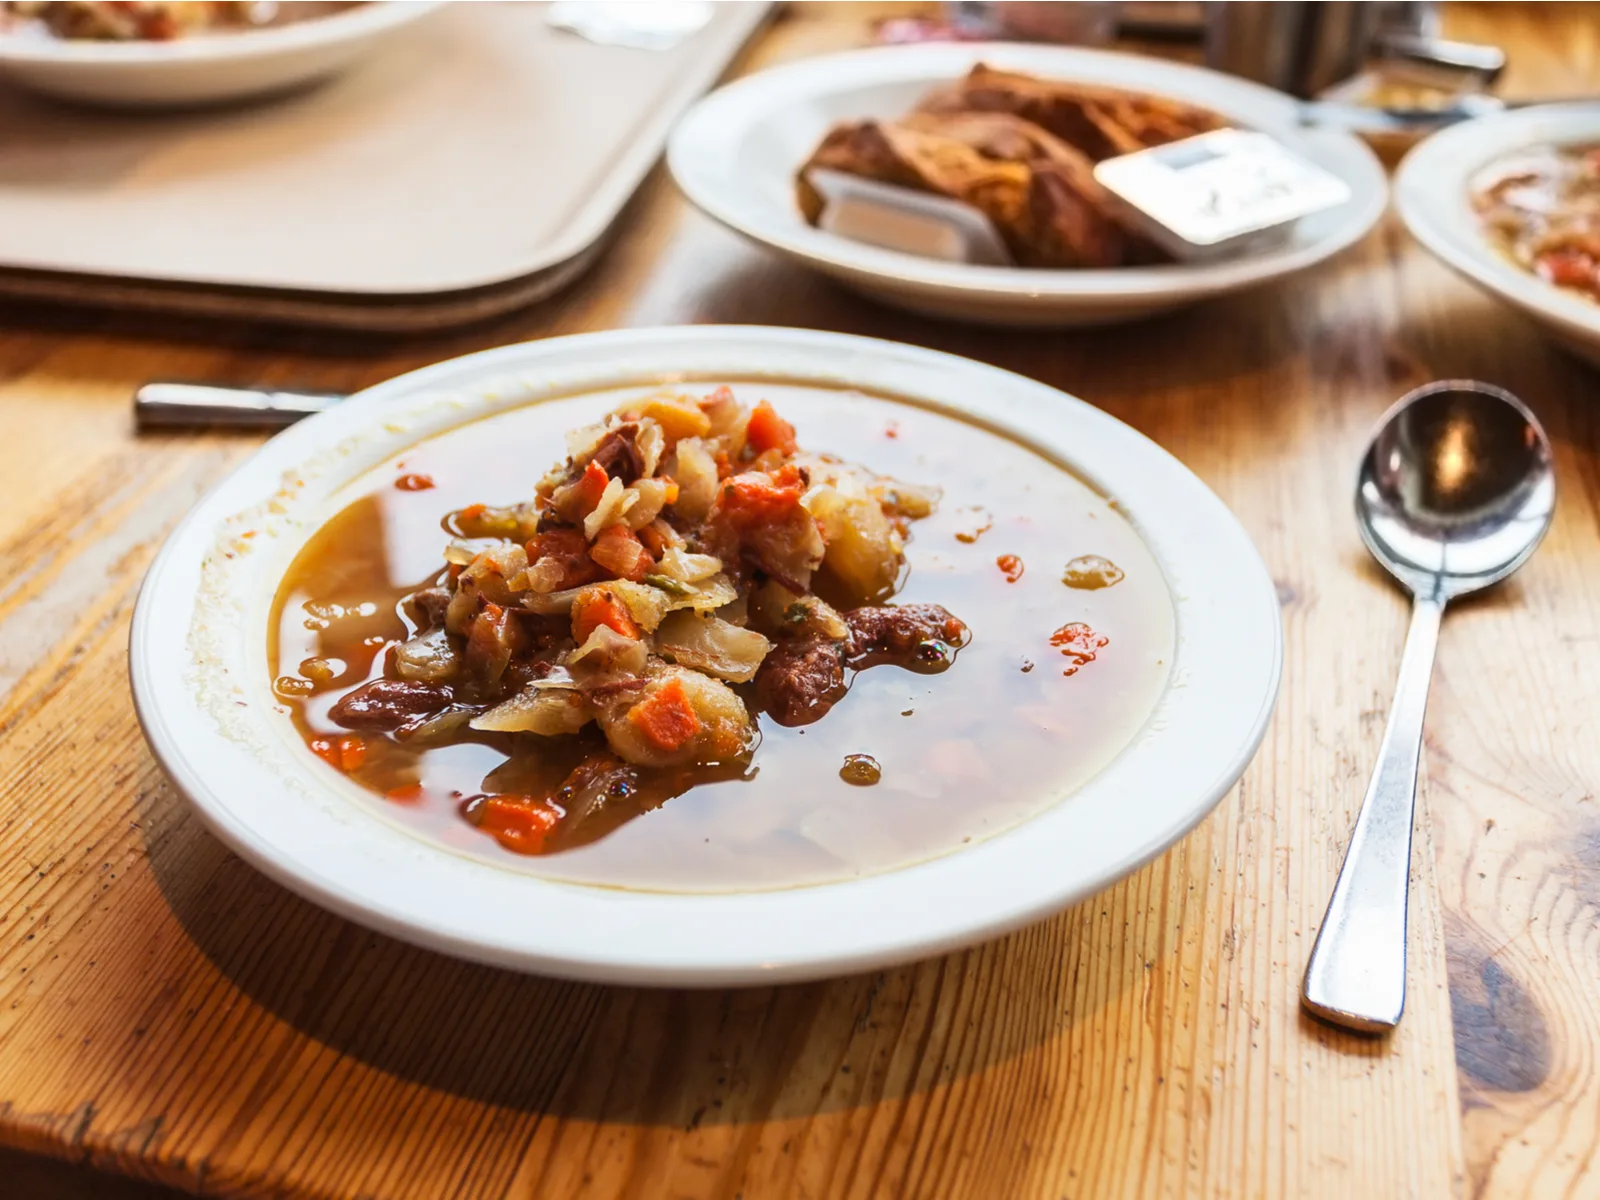 A plate of traditional Kjotsupa Icelandic Lamb Soup with a spoon and other dished blurred in background on a wooden table at Reykjavík Kitchen, known as one of the best restaurants in Iceland